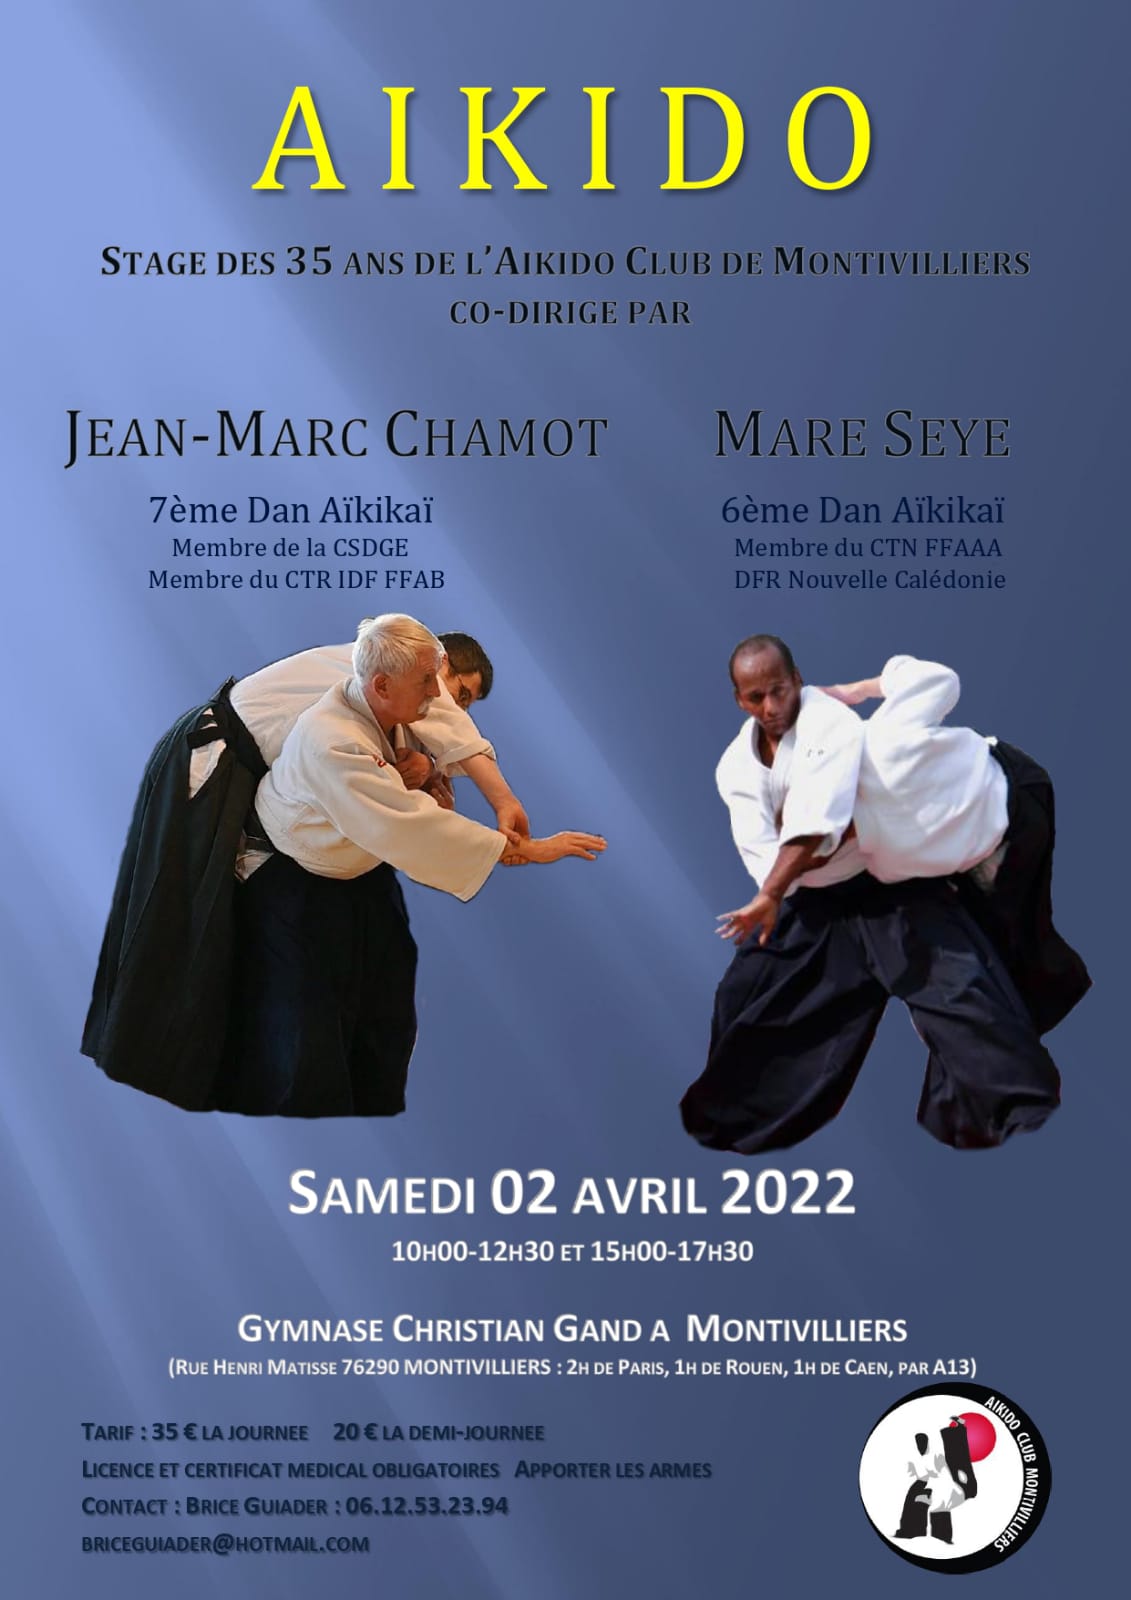 Aikido-Club-Evreux-Stage-Normandie-Jean-Marc-Chamot-Mare-Seye-2-avril-2022-Montivilliers